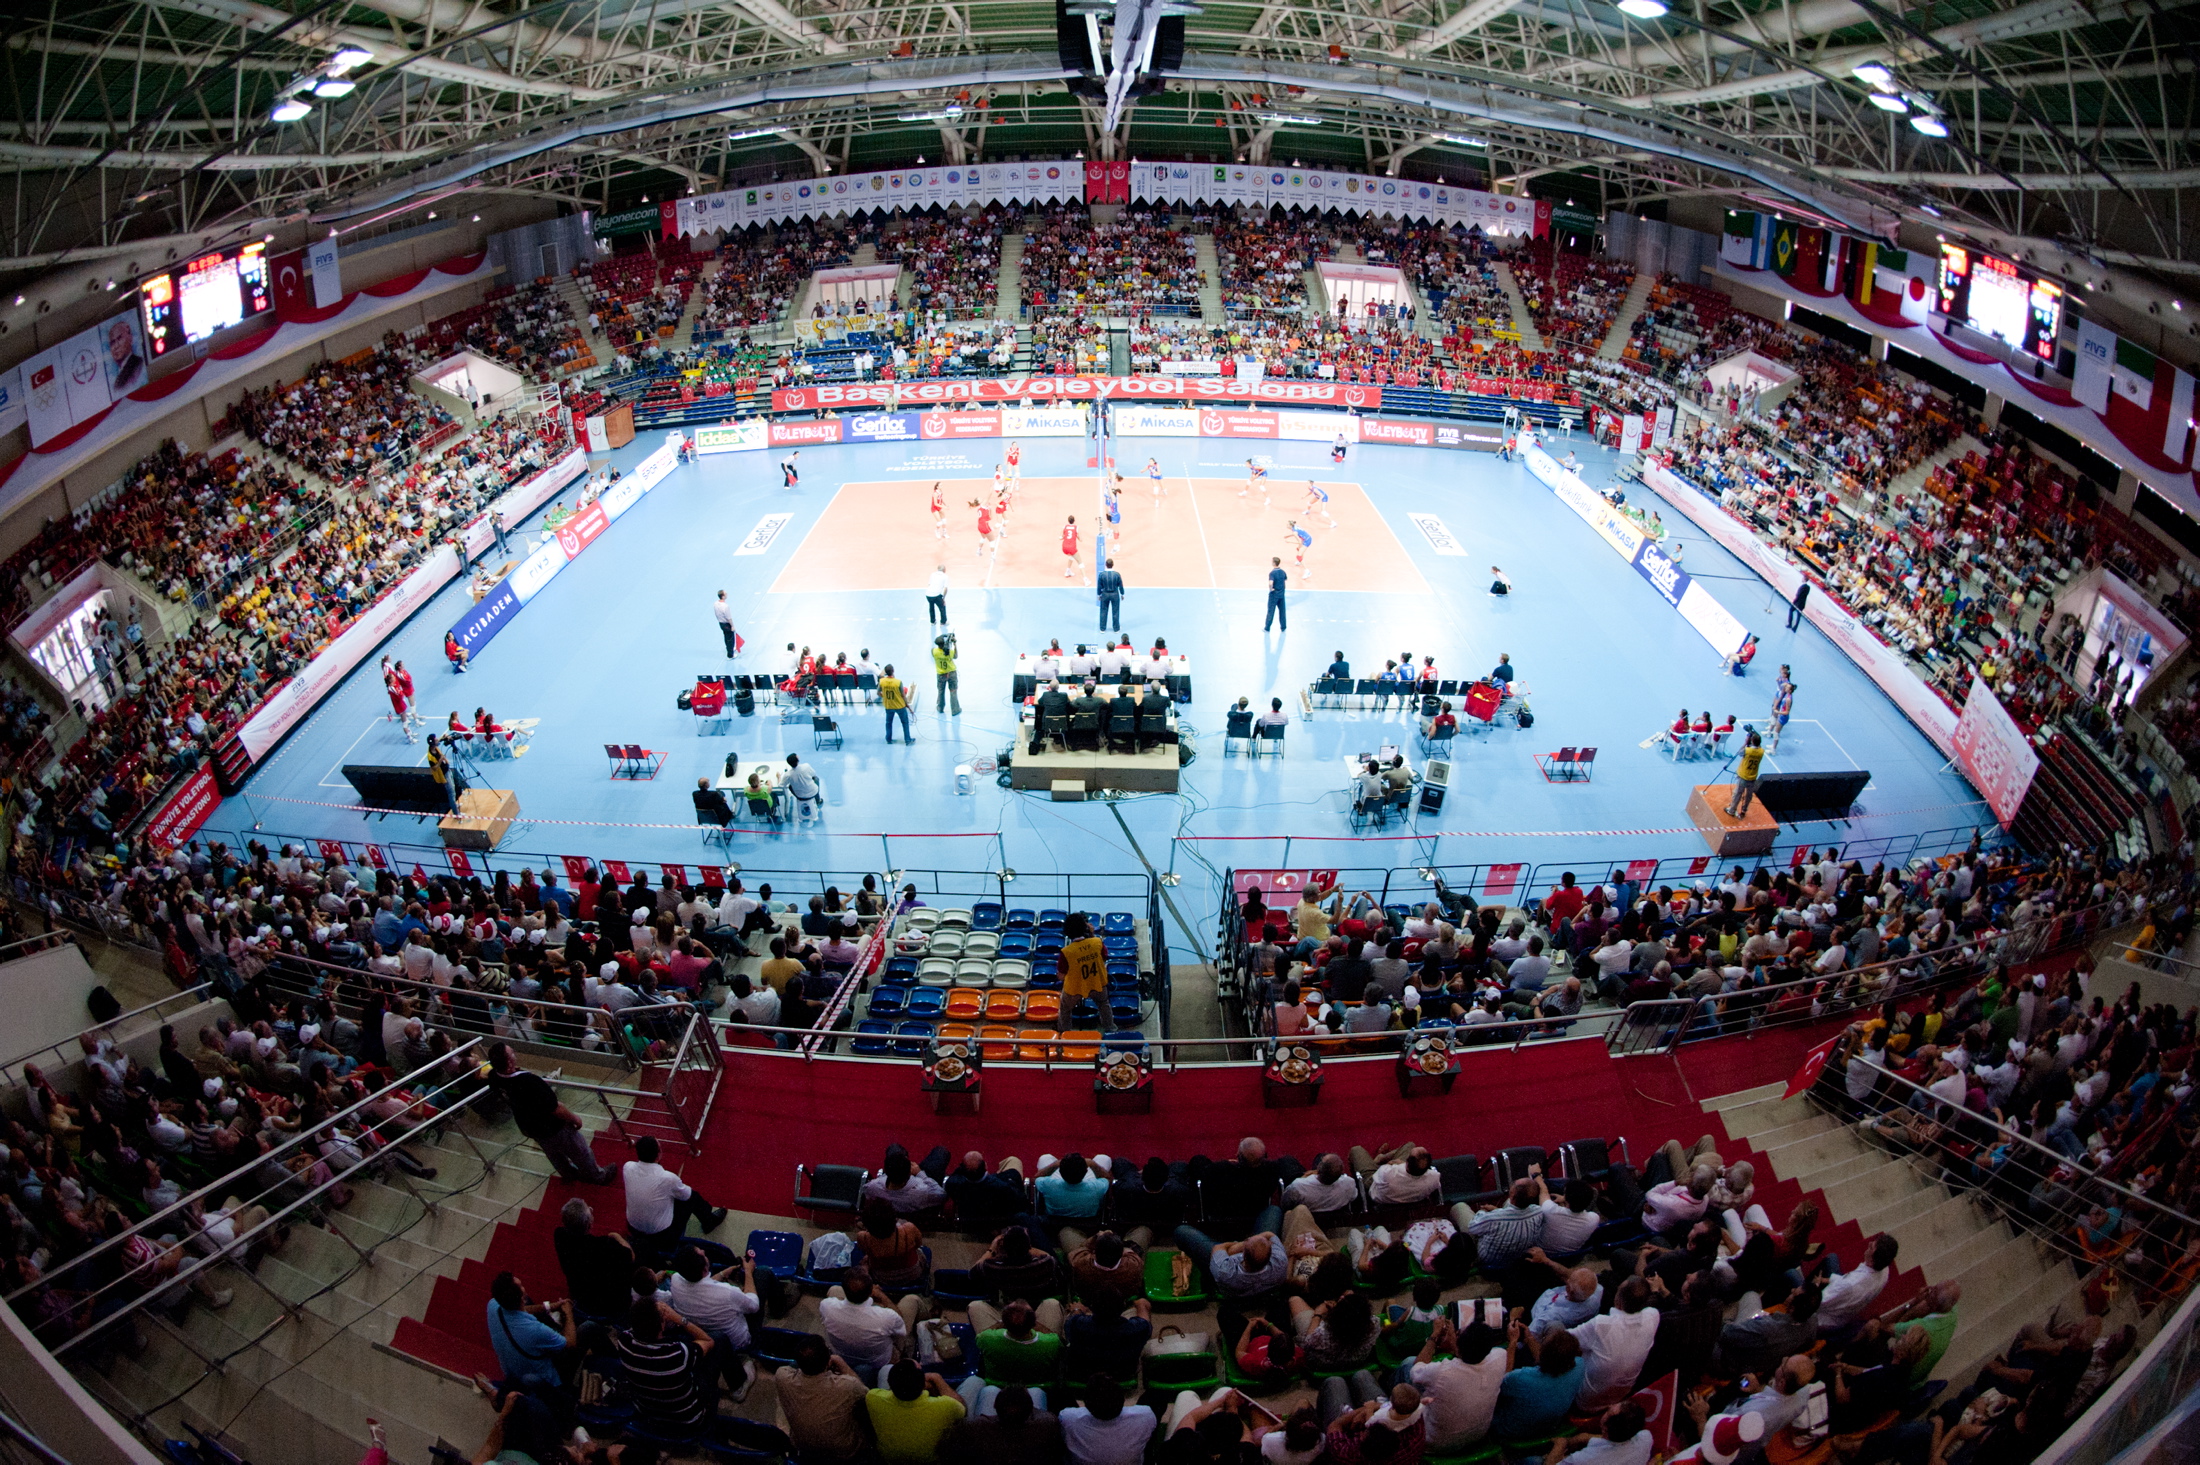 How to bet on the FIVB Volleyball Men’s Nations League?